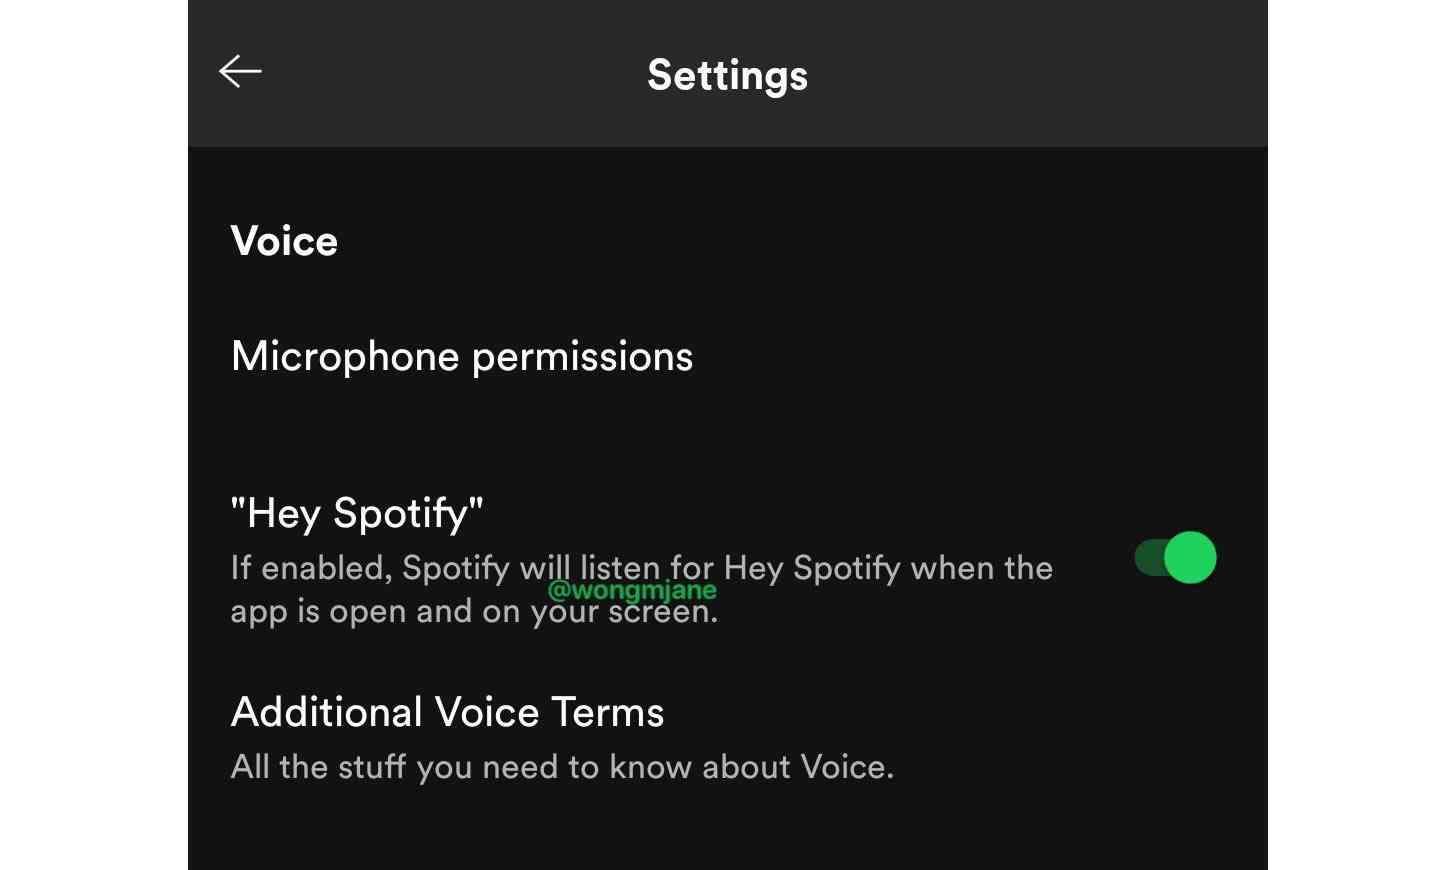 Hey Spotify hotword voice activation